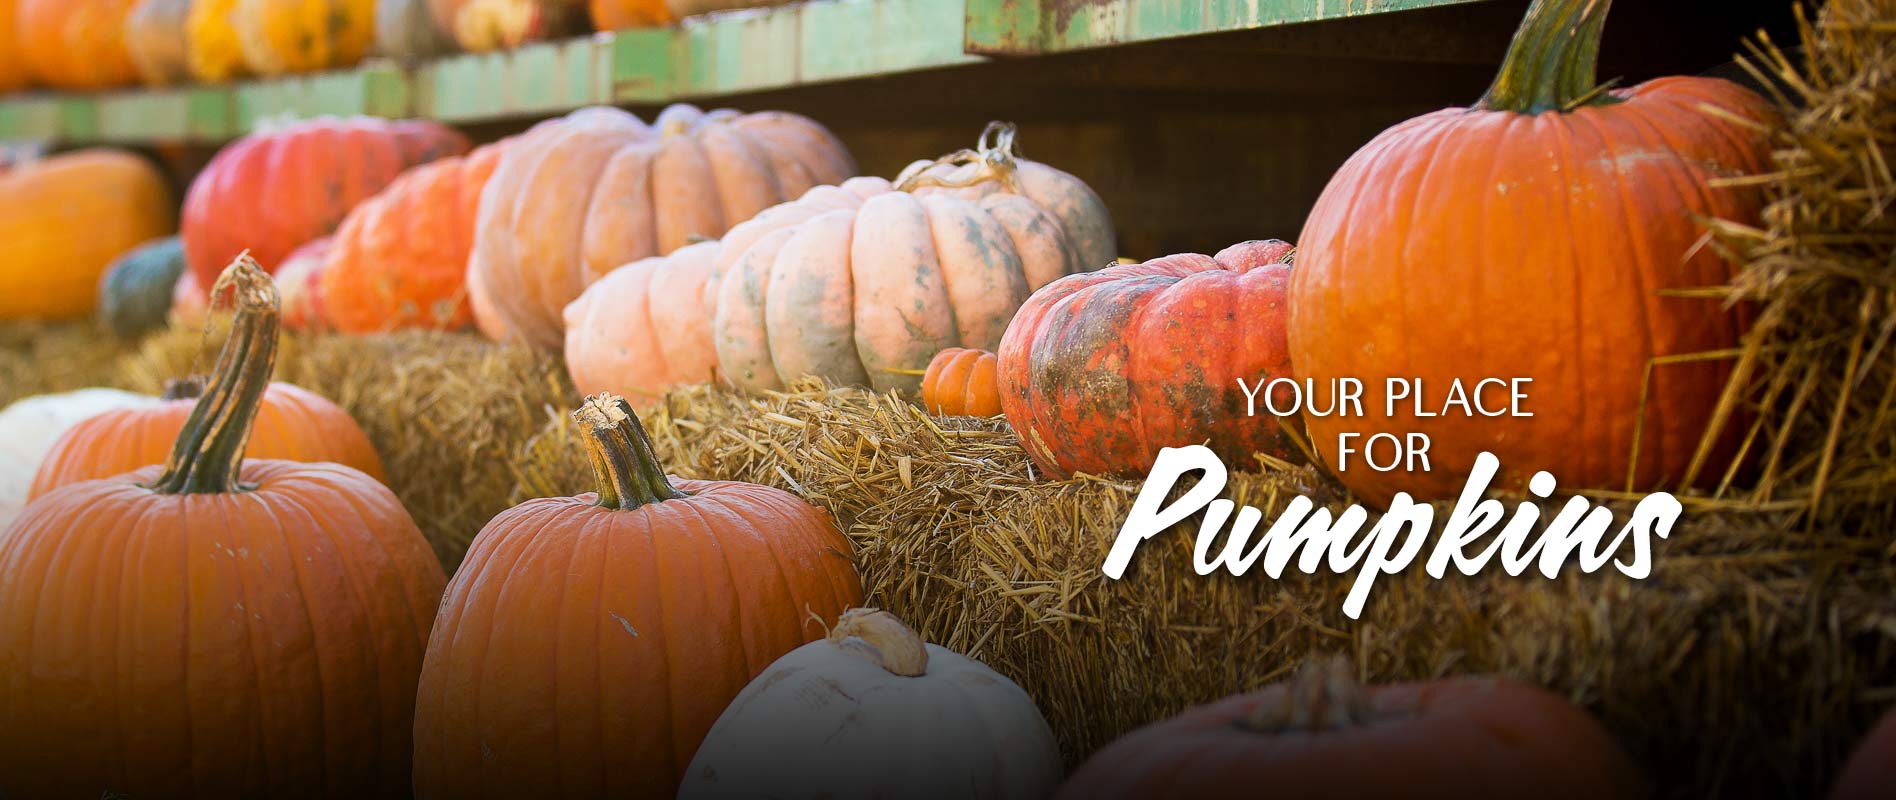 Your place for pumpkins! Fort Worth Pumpkin Patch at the Shops at Clearfork